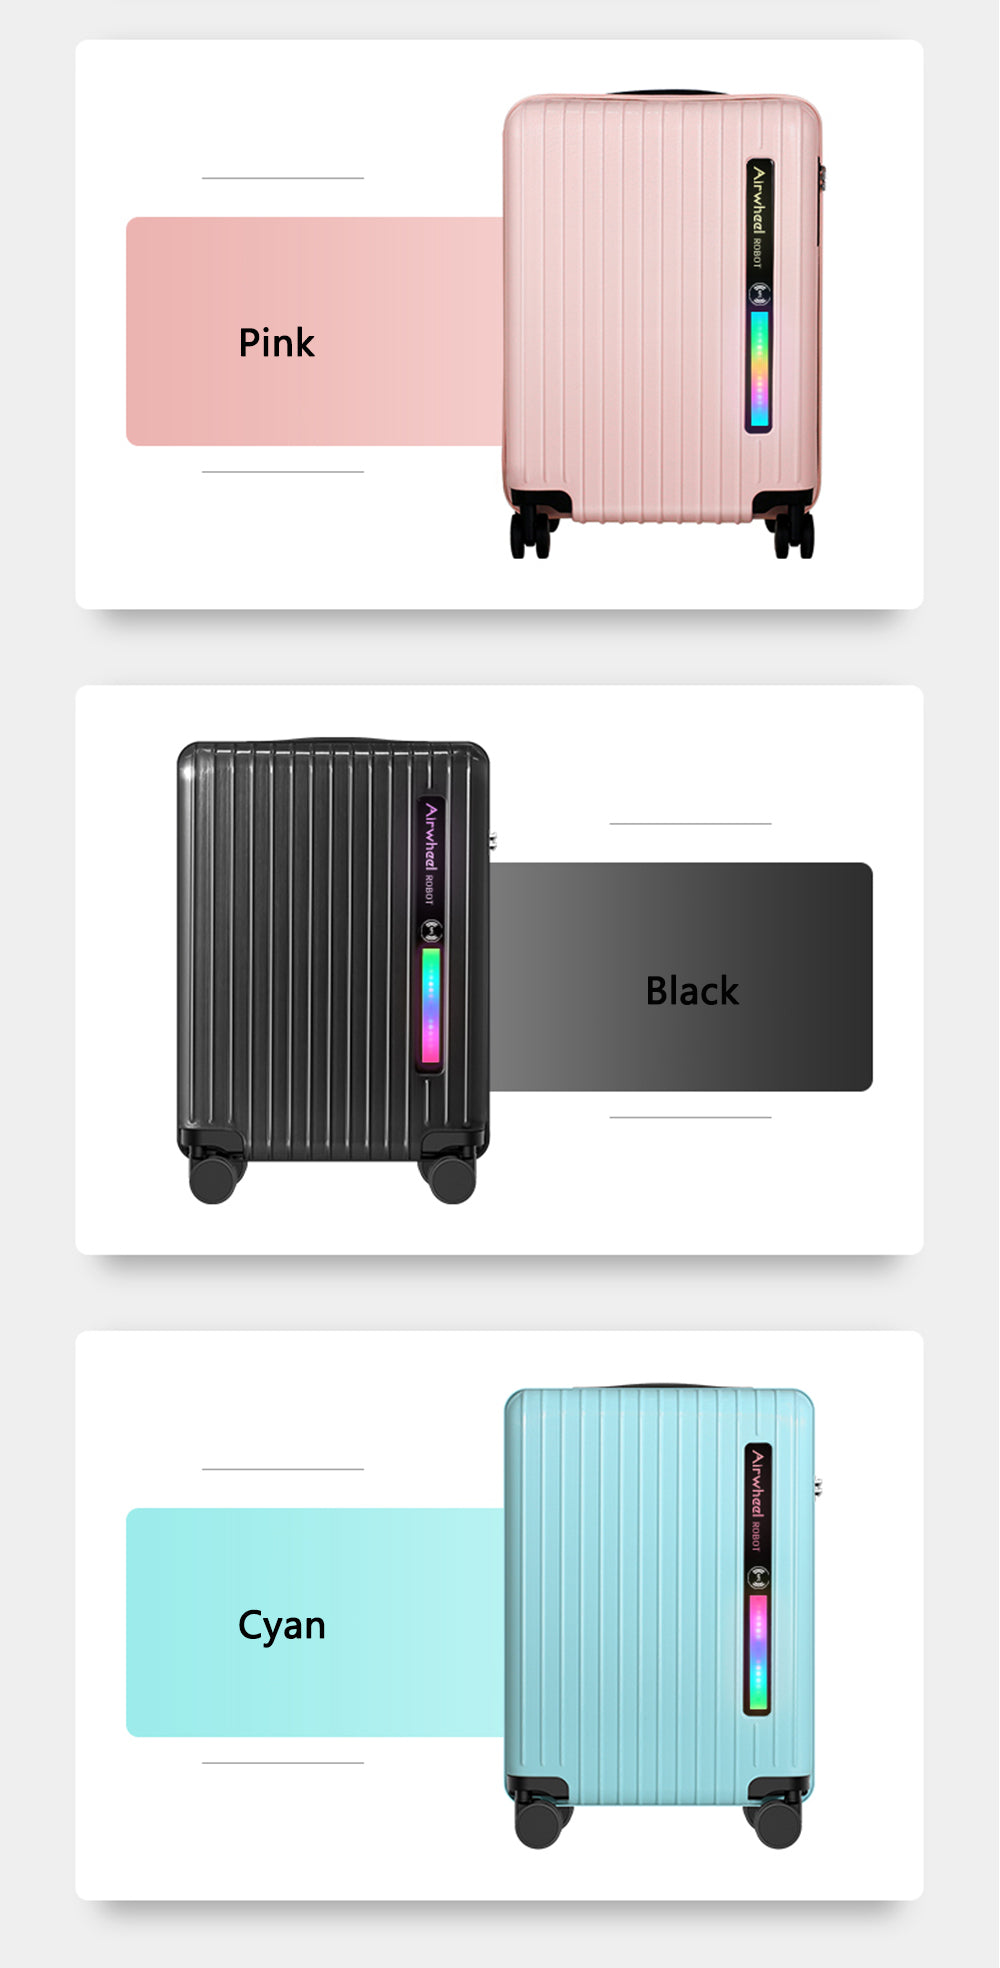 airwheelfactory-electric luggage-rideable suitcase-SL3C pink-black-cyan